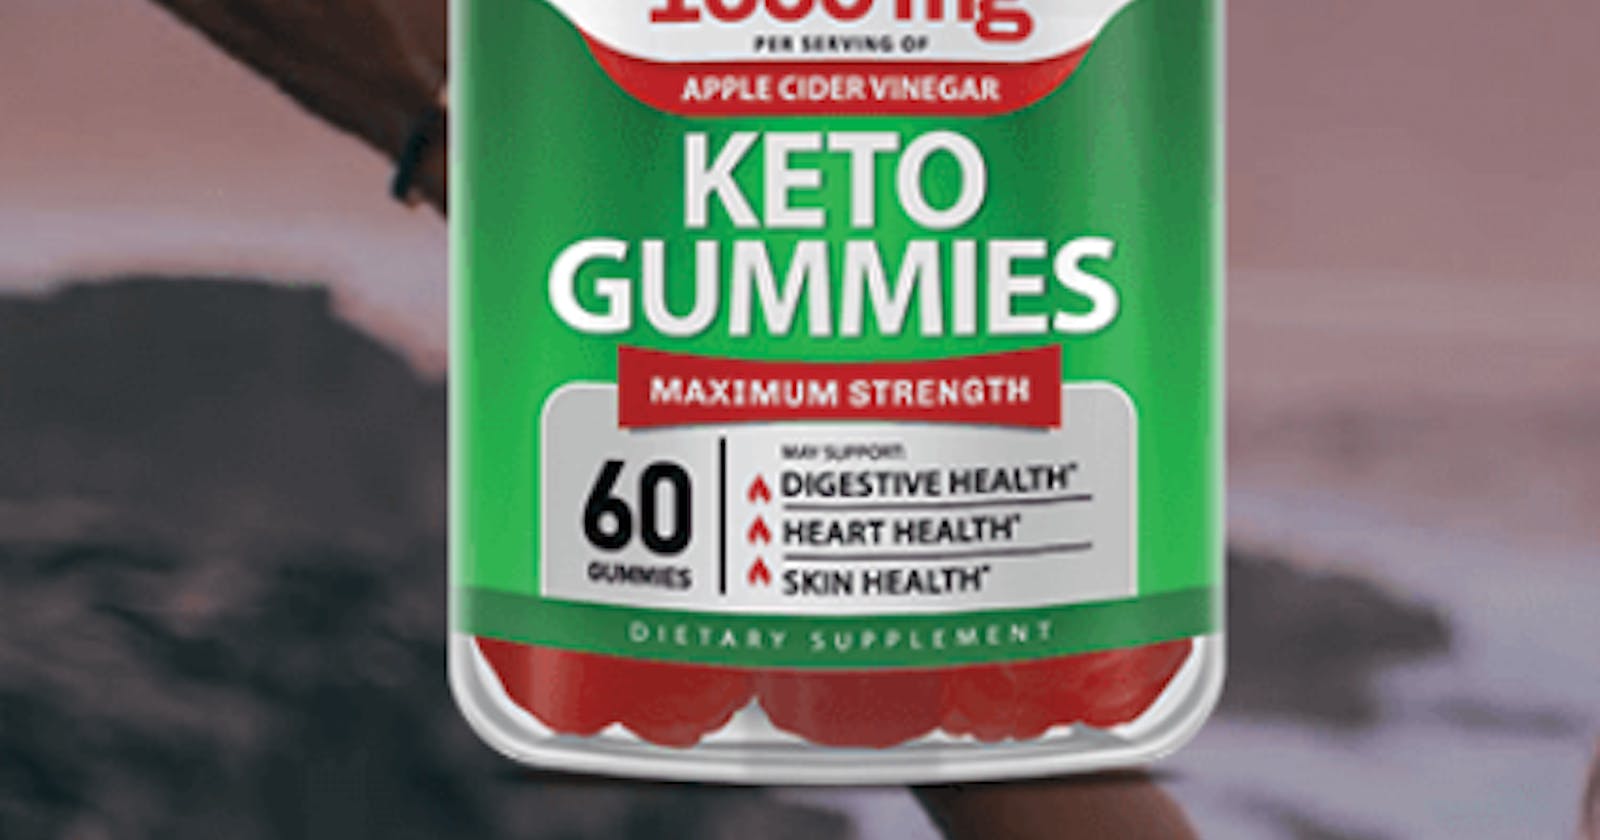 FirstCore Keto Gummies Reviews For Weight Loss?